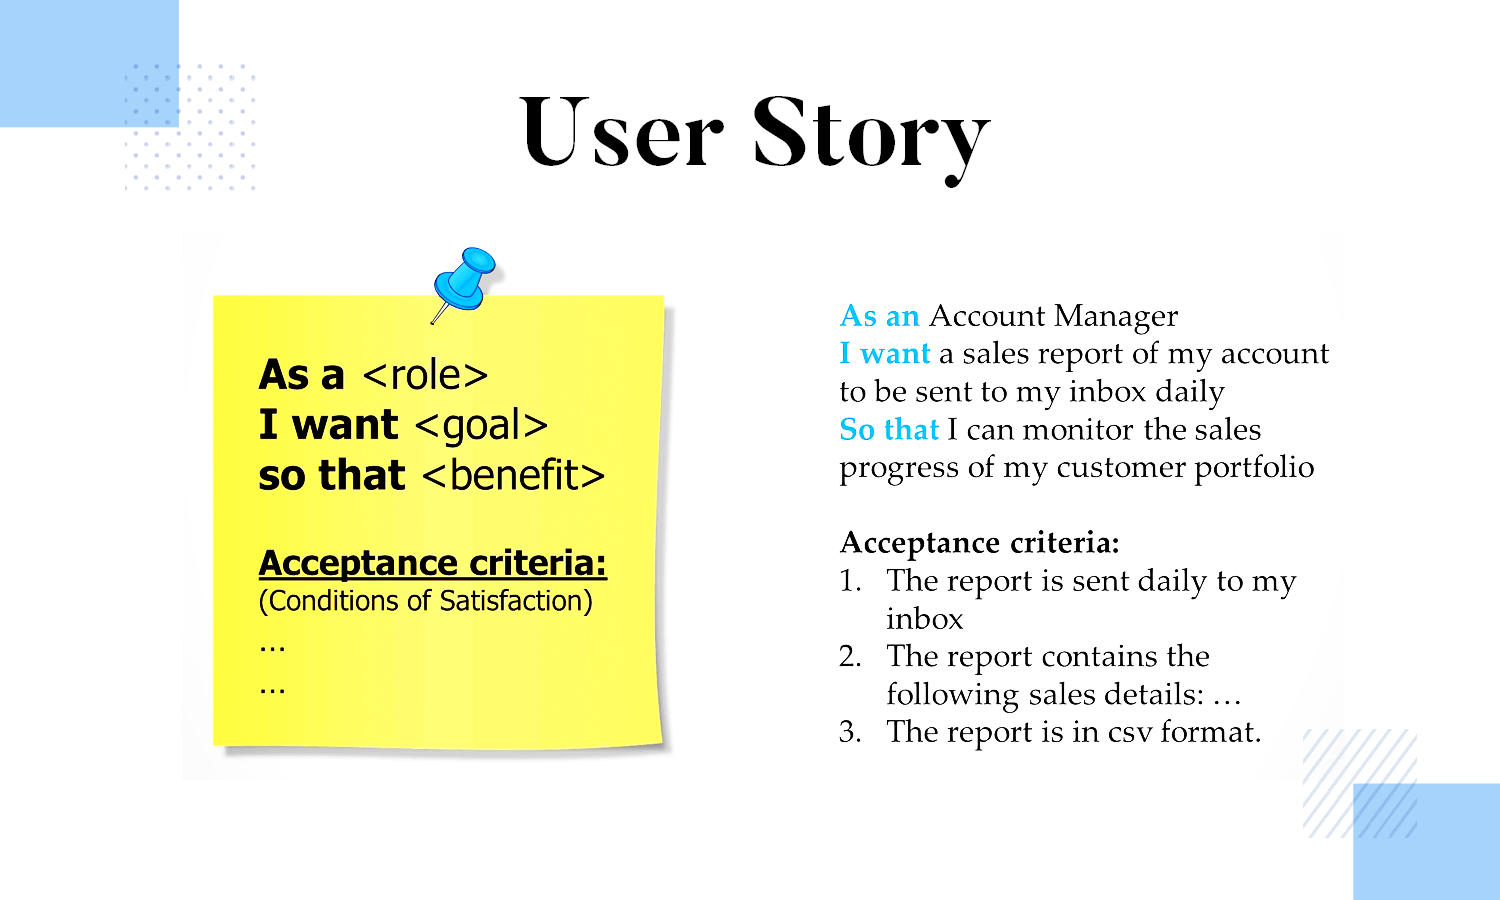 17 Useful user story examples to get you started - Justinmind